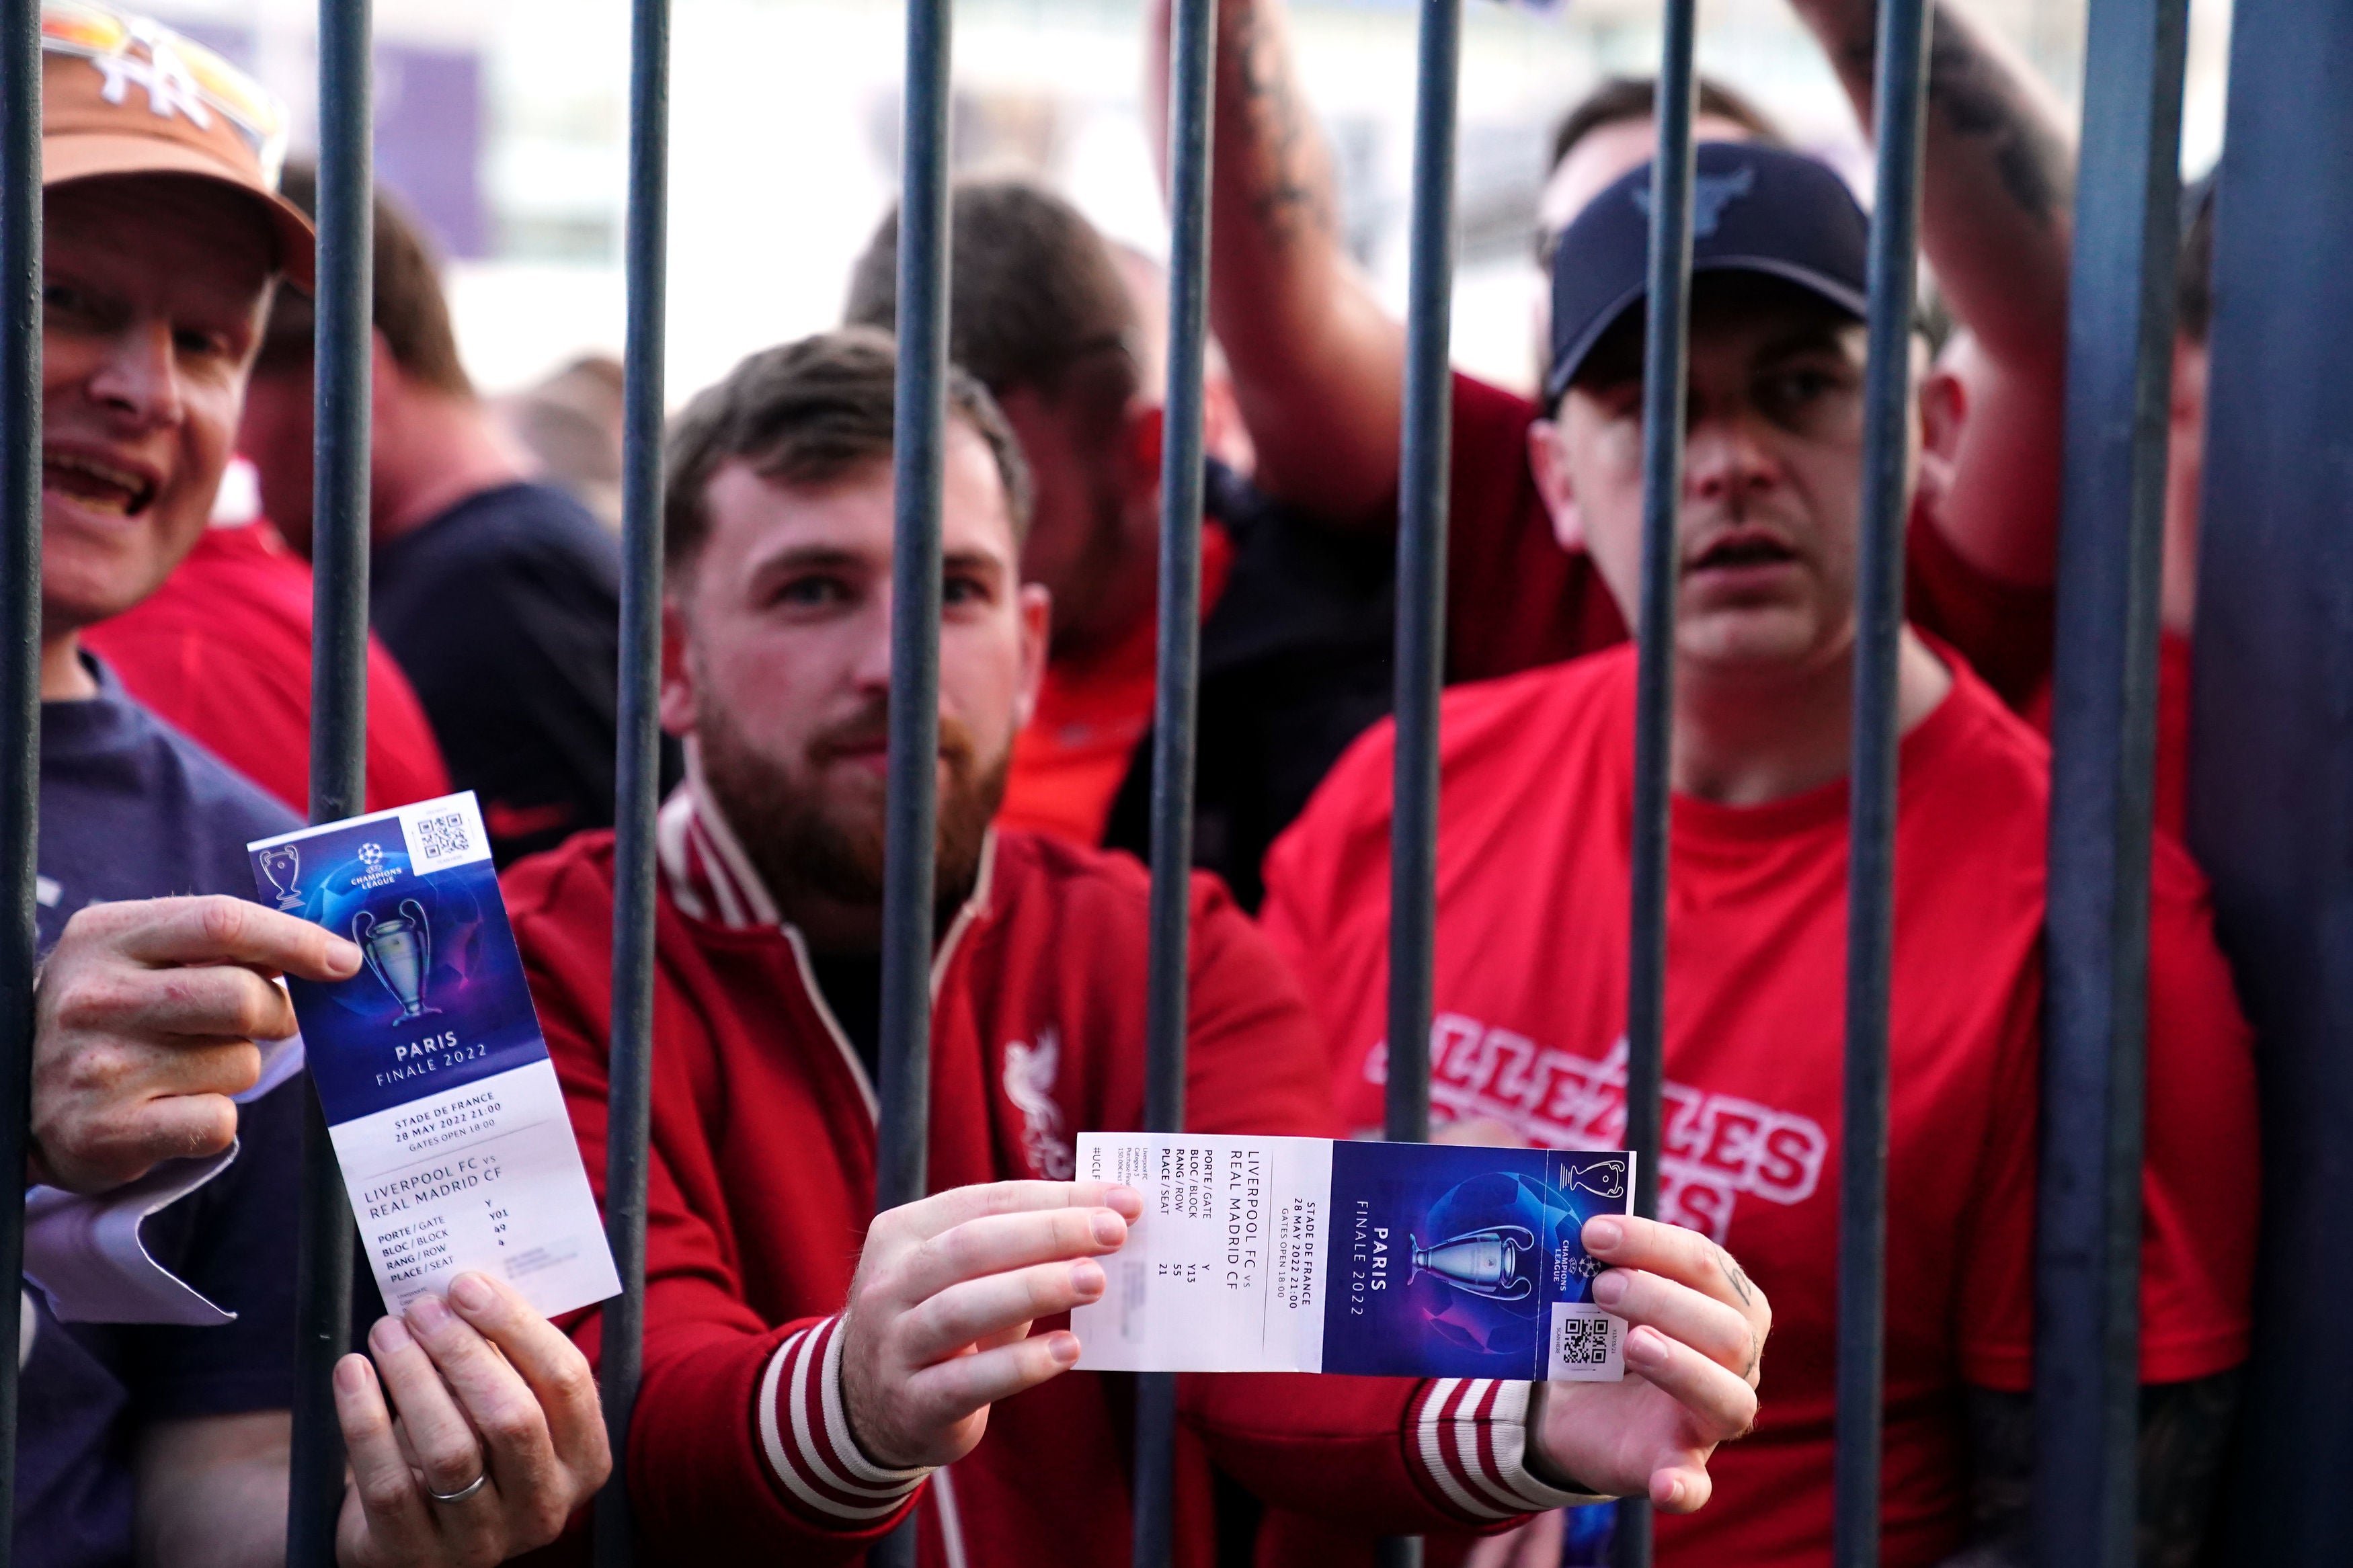 Liverpool fans show their tickets outside the stadium